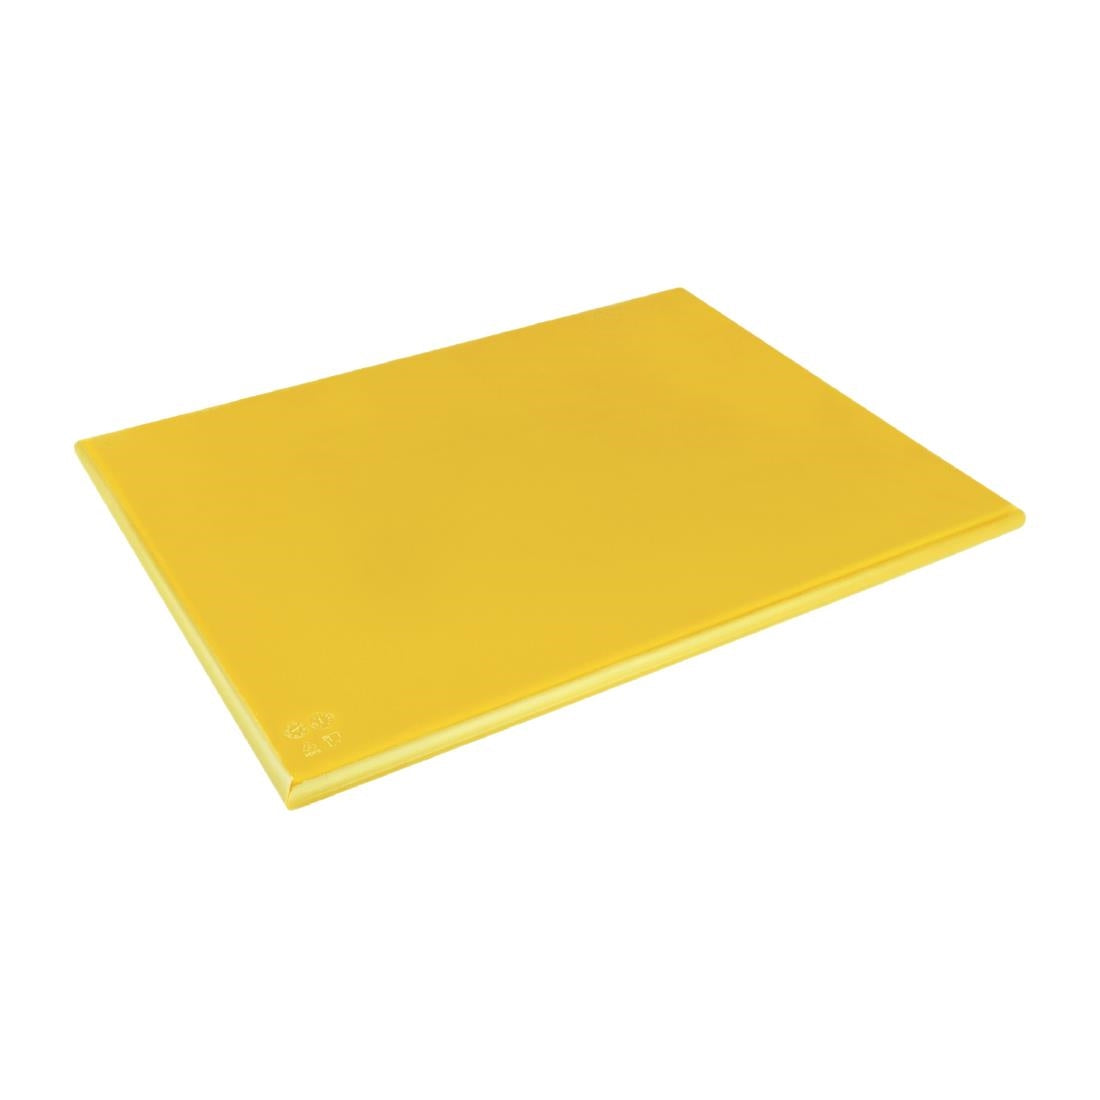 Hygiplas Extra Thick High Density Yellow Chopping Board Large JD Catering Equipment Solutions Ltd